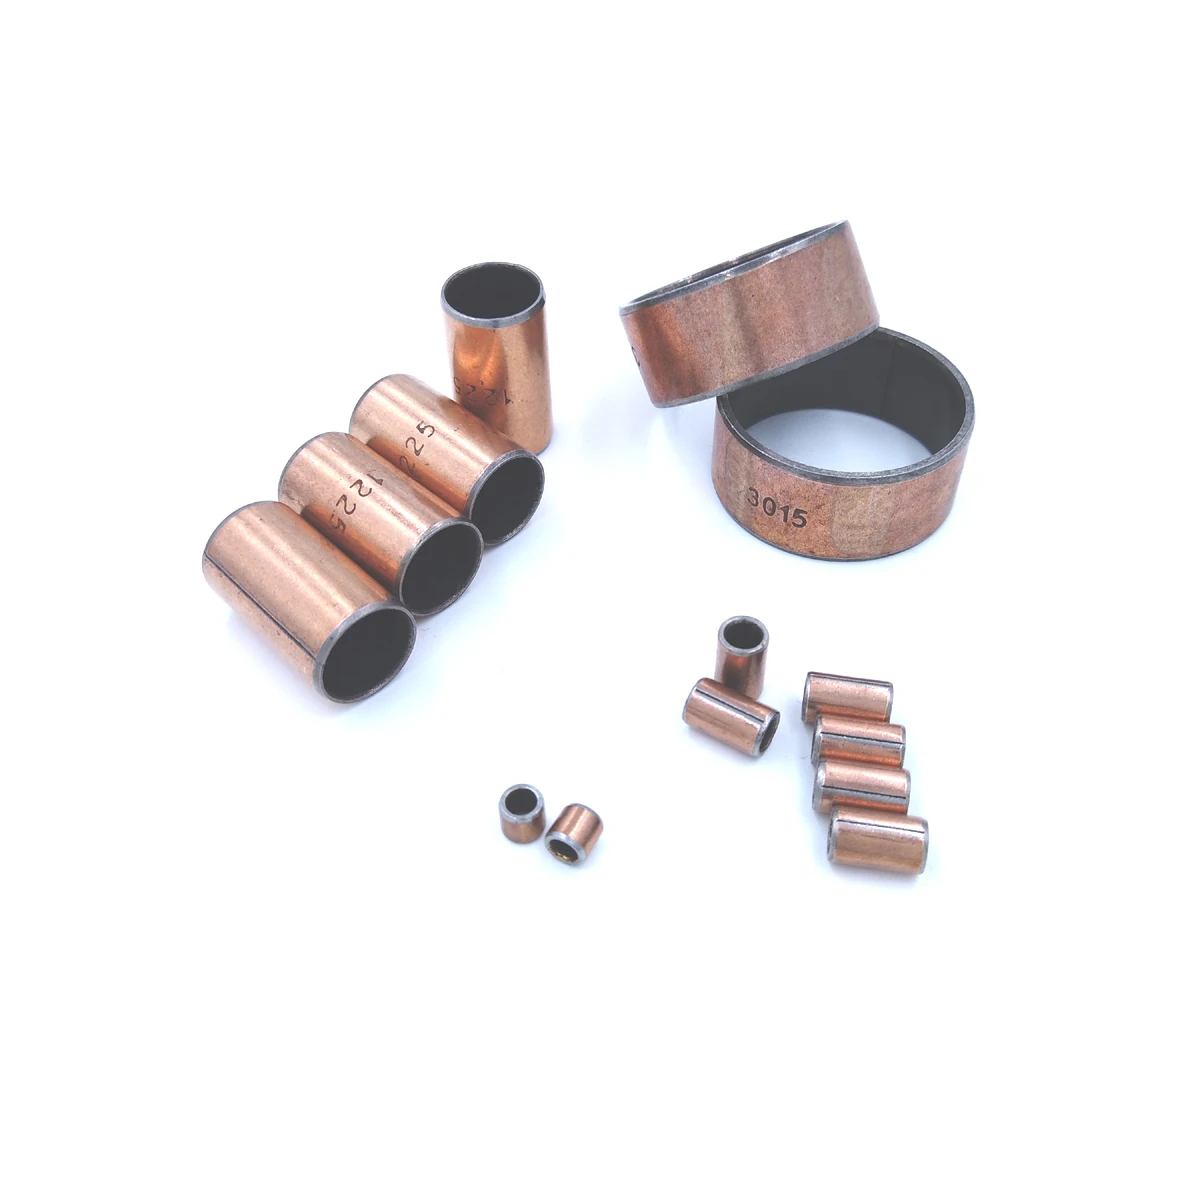 IDx0DxL Details about   10x SF-1 Bearing Bushing For Industrial Commercial 10mmx12mmx20mm 